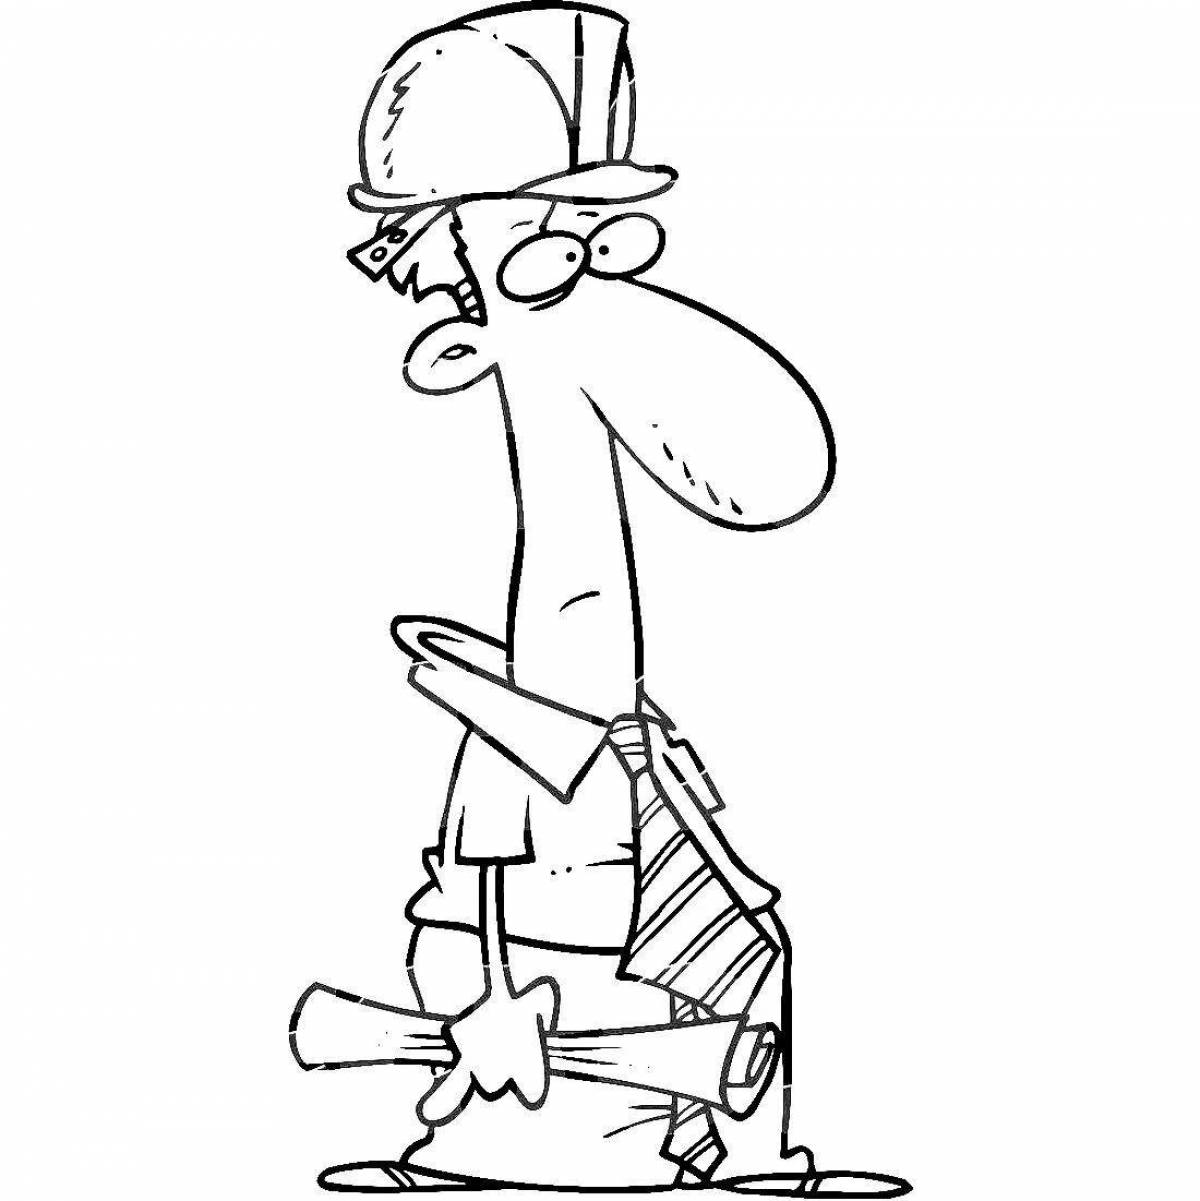 Decisive engineer coloring page